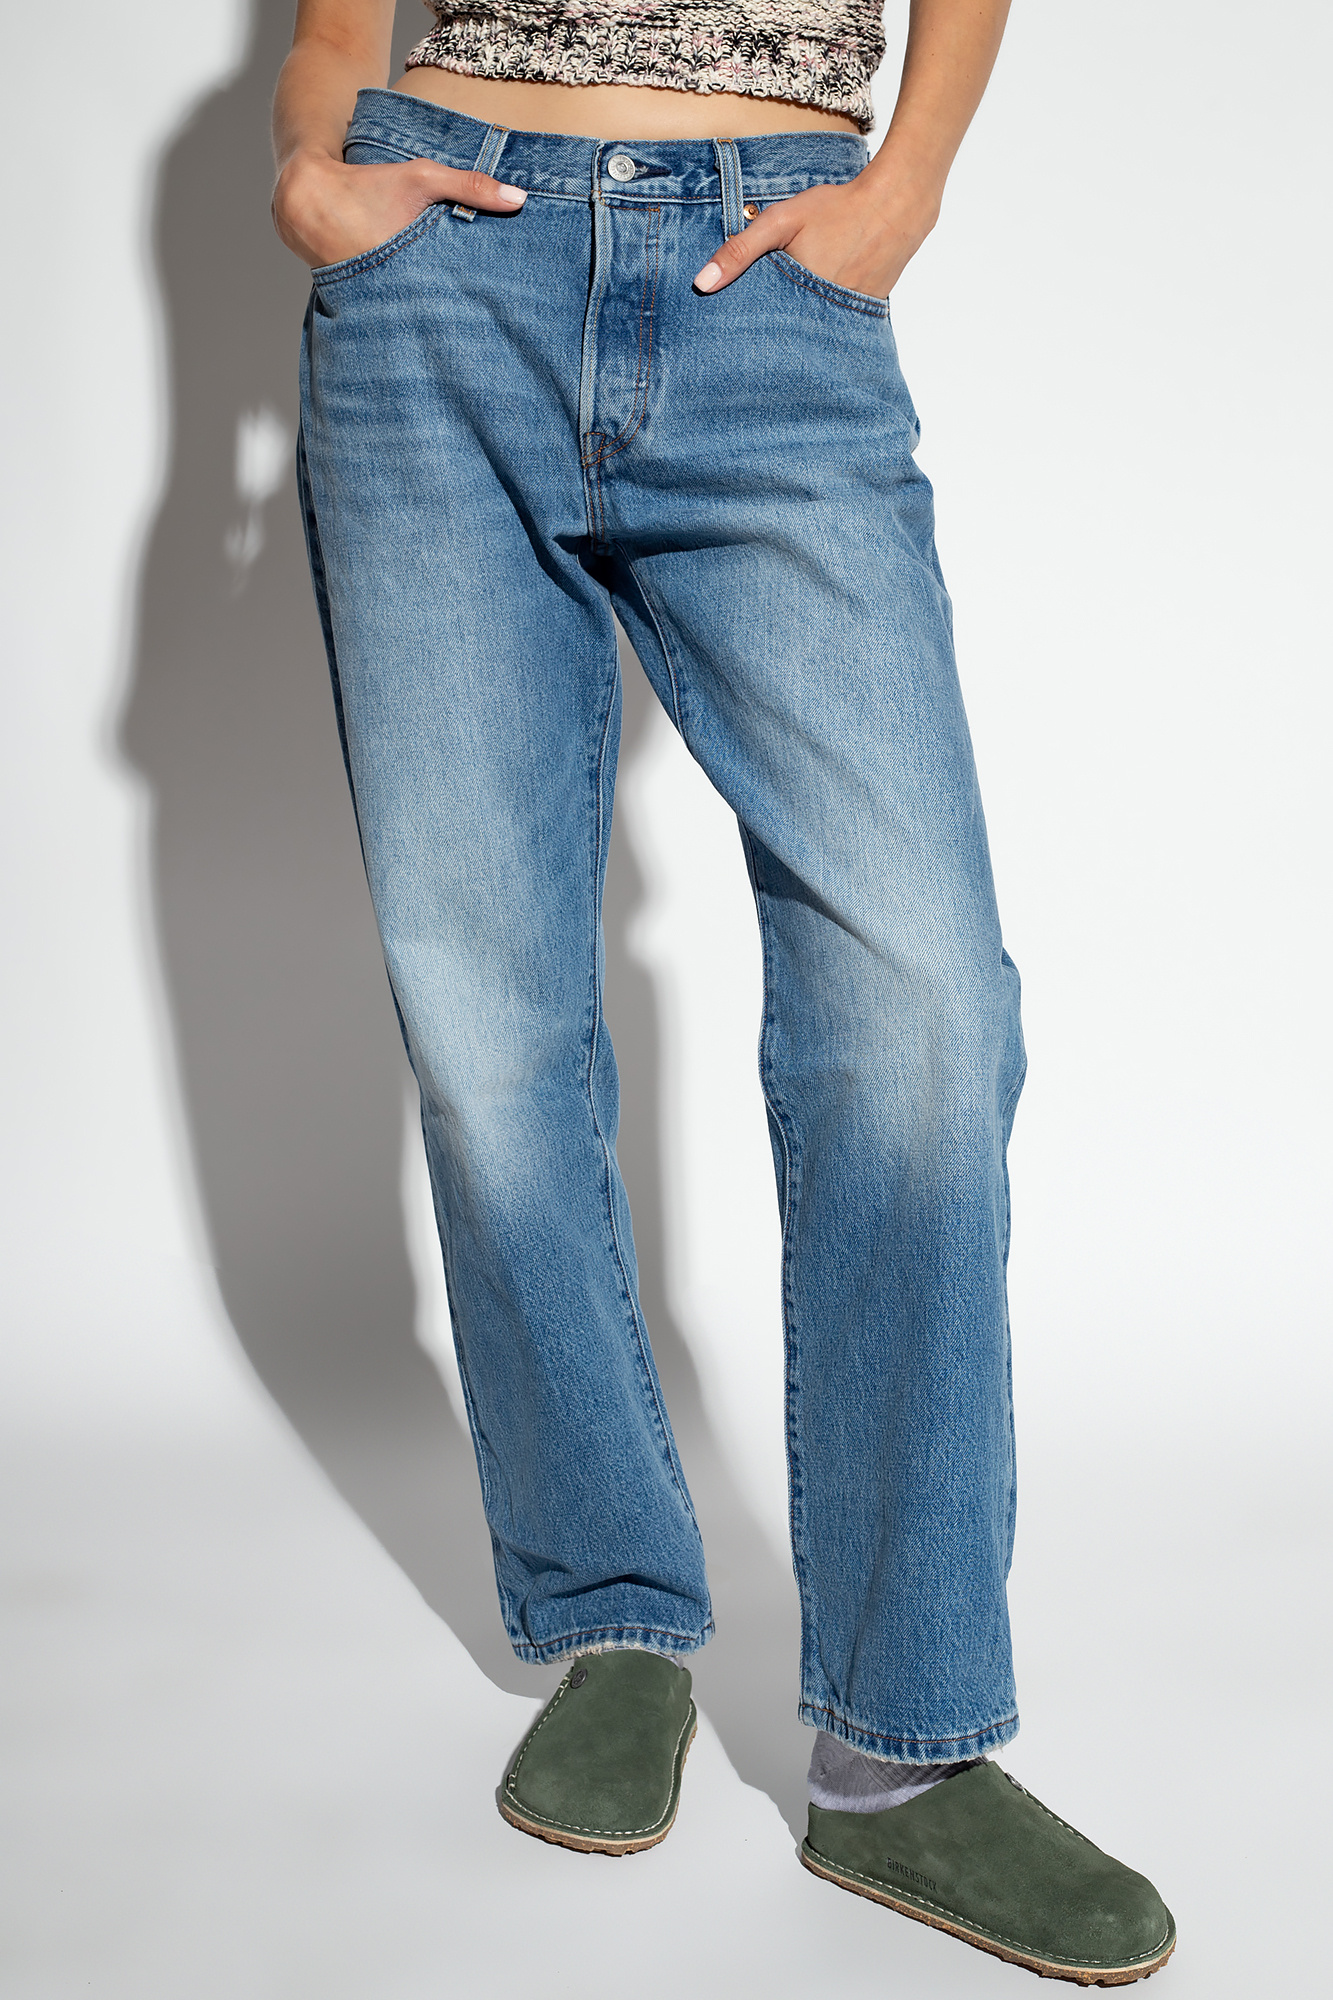 Levi's '501® 90'S' jeans from 'Responsibly Made' collection